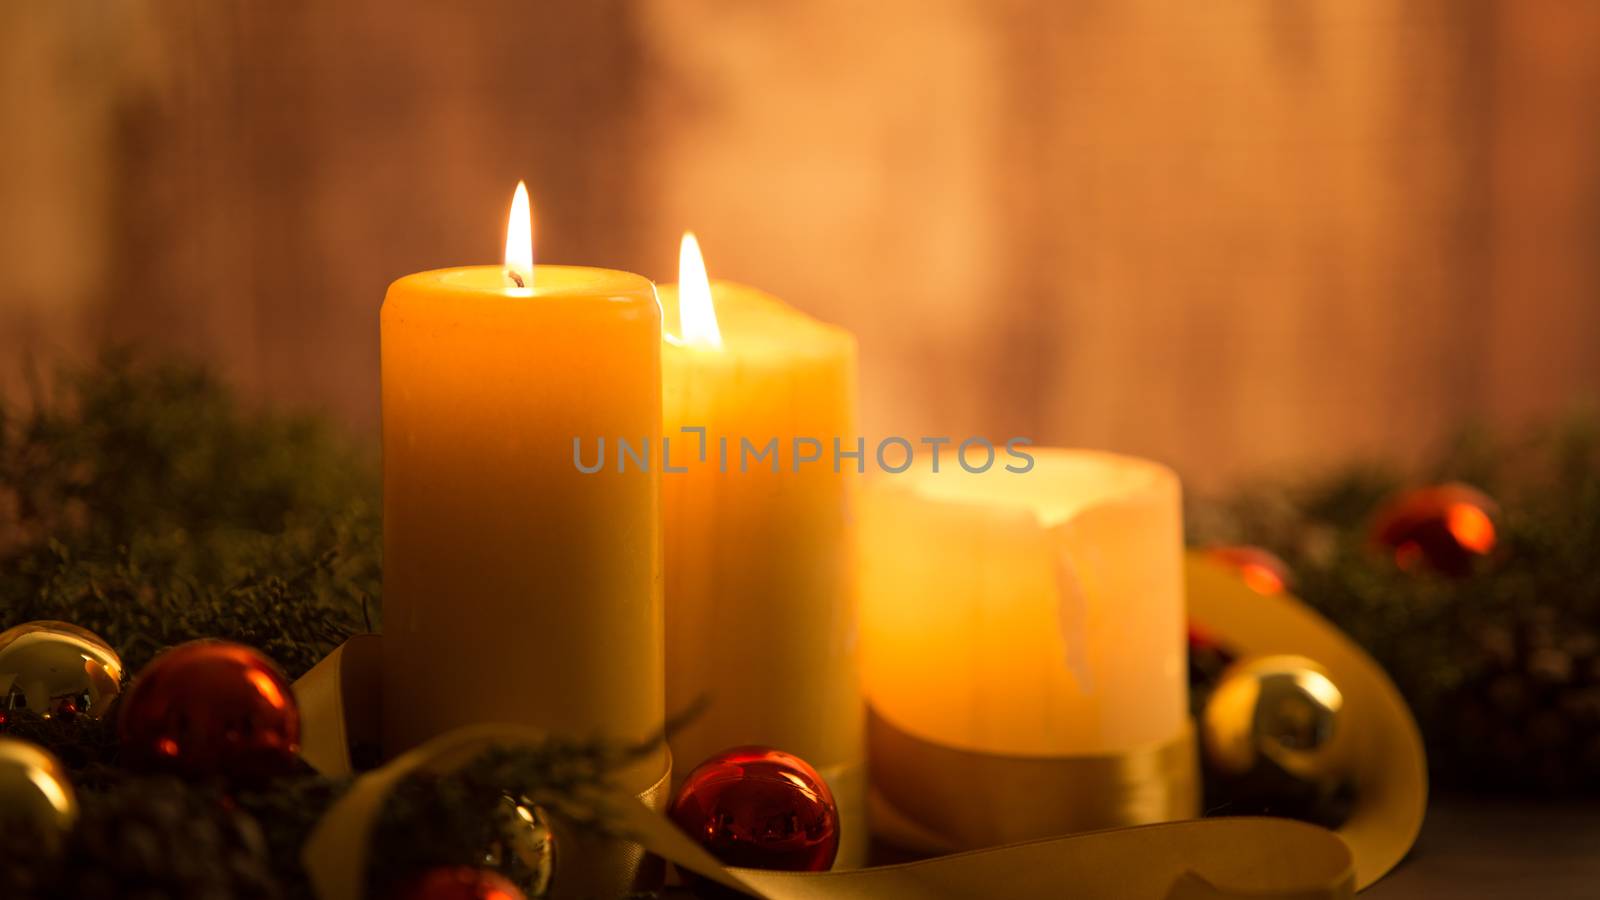 The warmth of the Christmas concept: close up of three candles lit on a dark wooden table and with pine branches, natural pine cones and gold and red bright baubles with a gold satin ribbon by robbyfontanesi